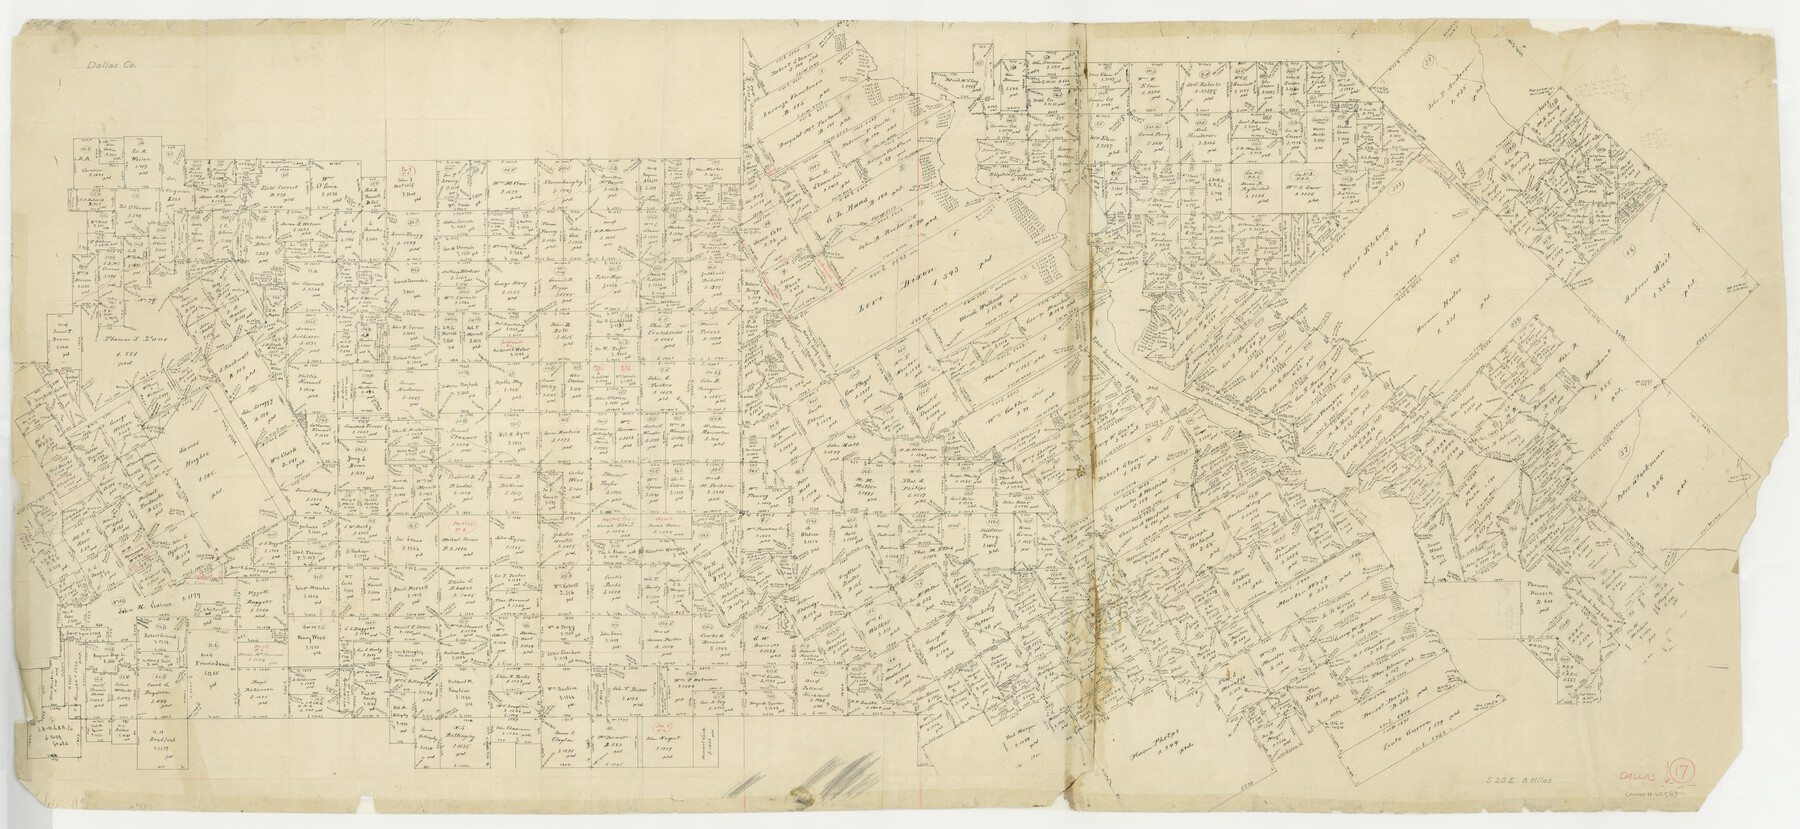 68583, Dallas County Working Sketch 17, General Map Collection